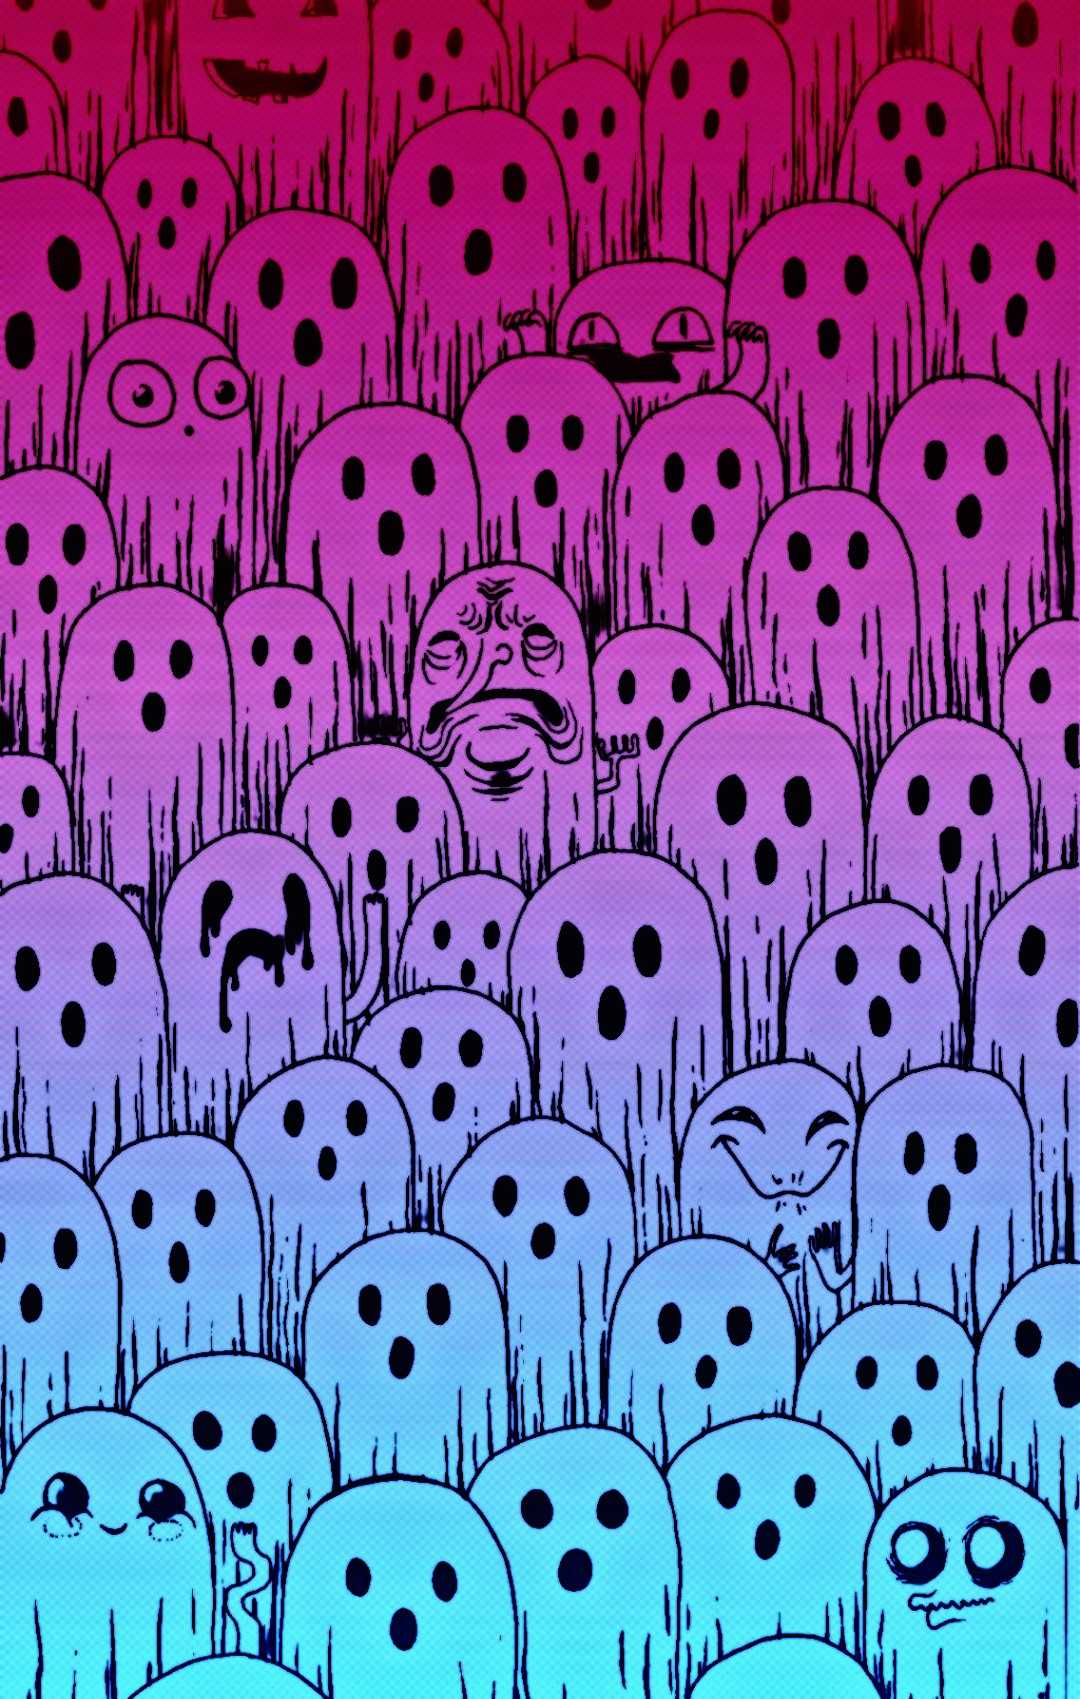 IPhone wallpaper with a bunch of ghosts on it - Bisexual